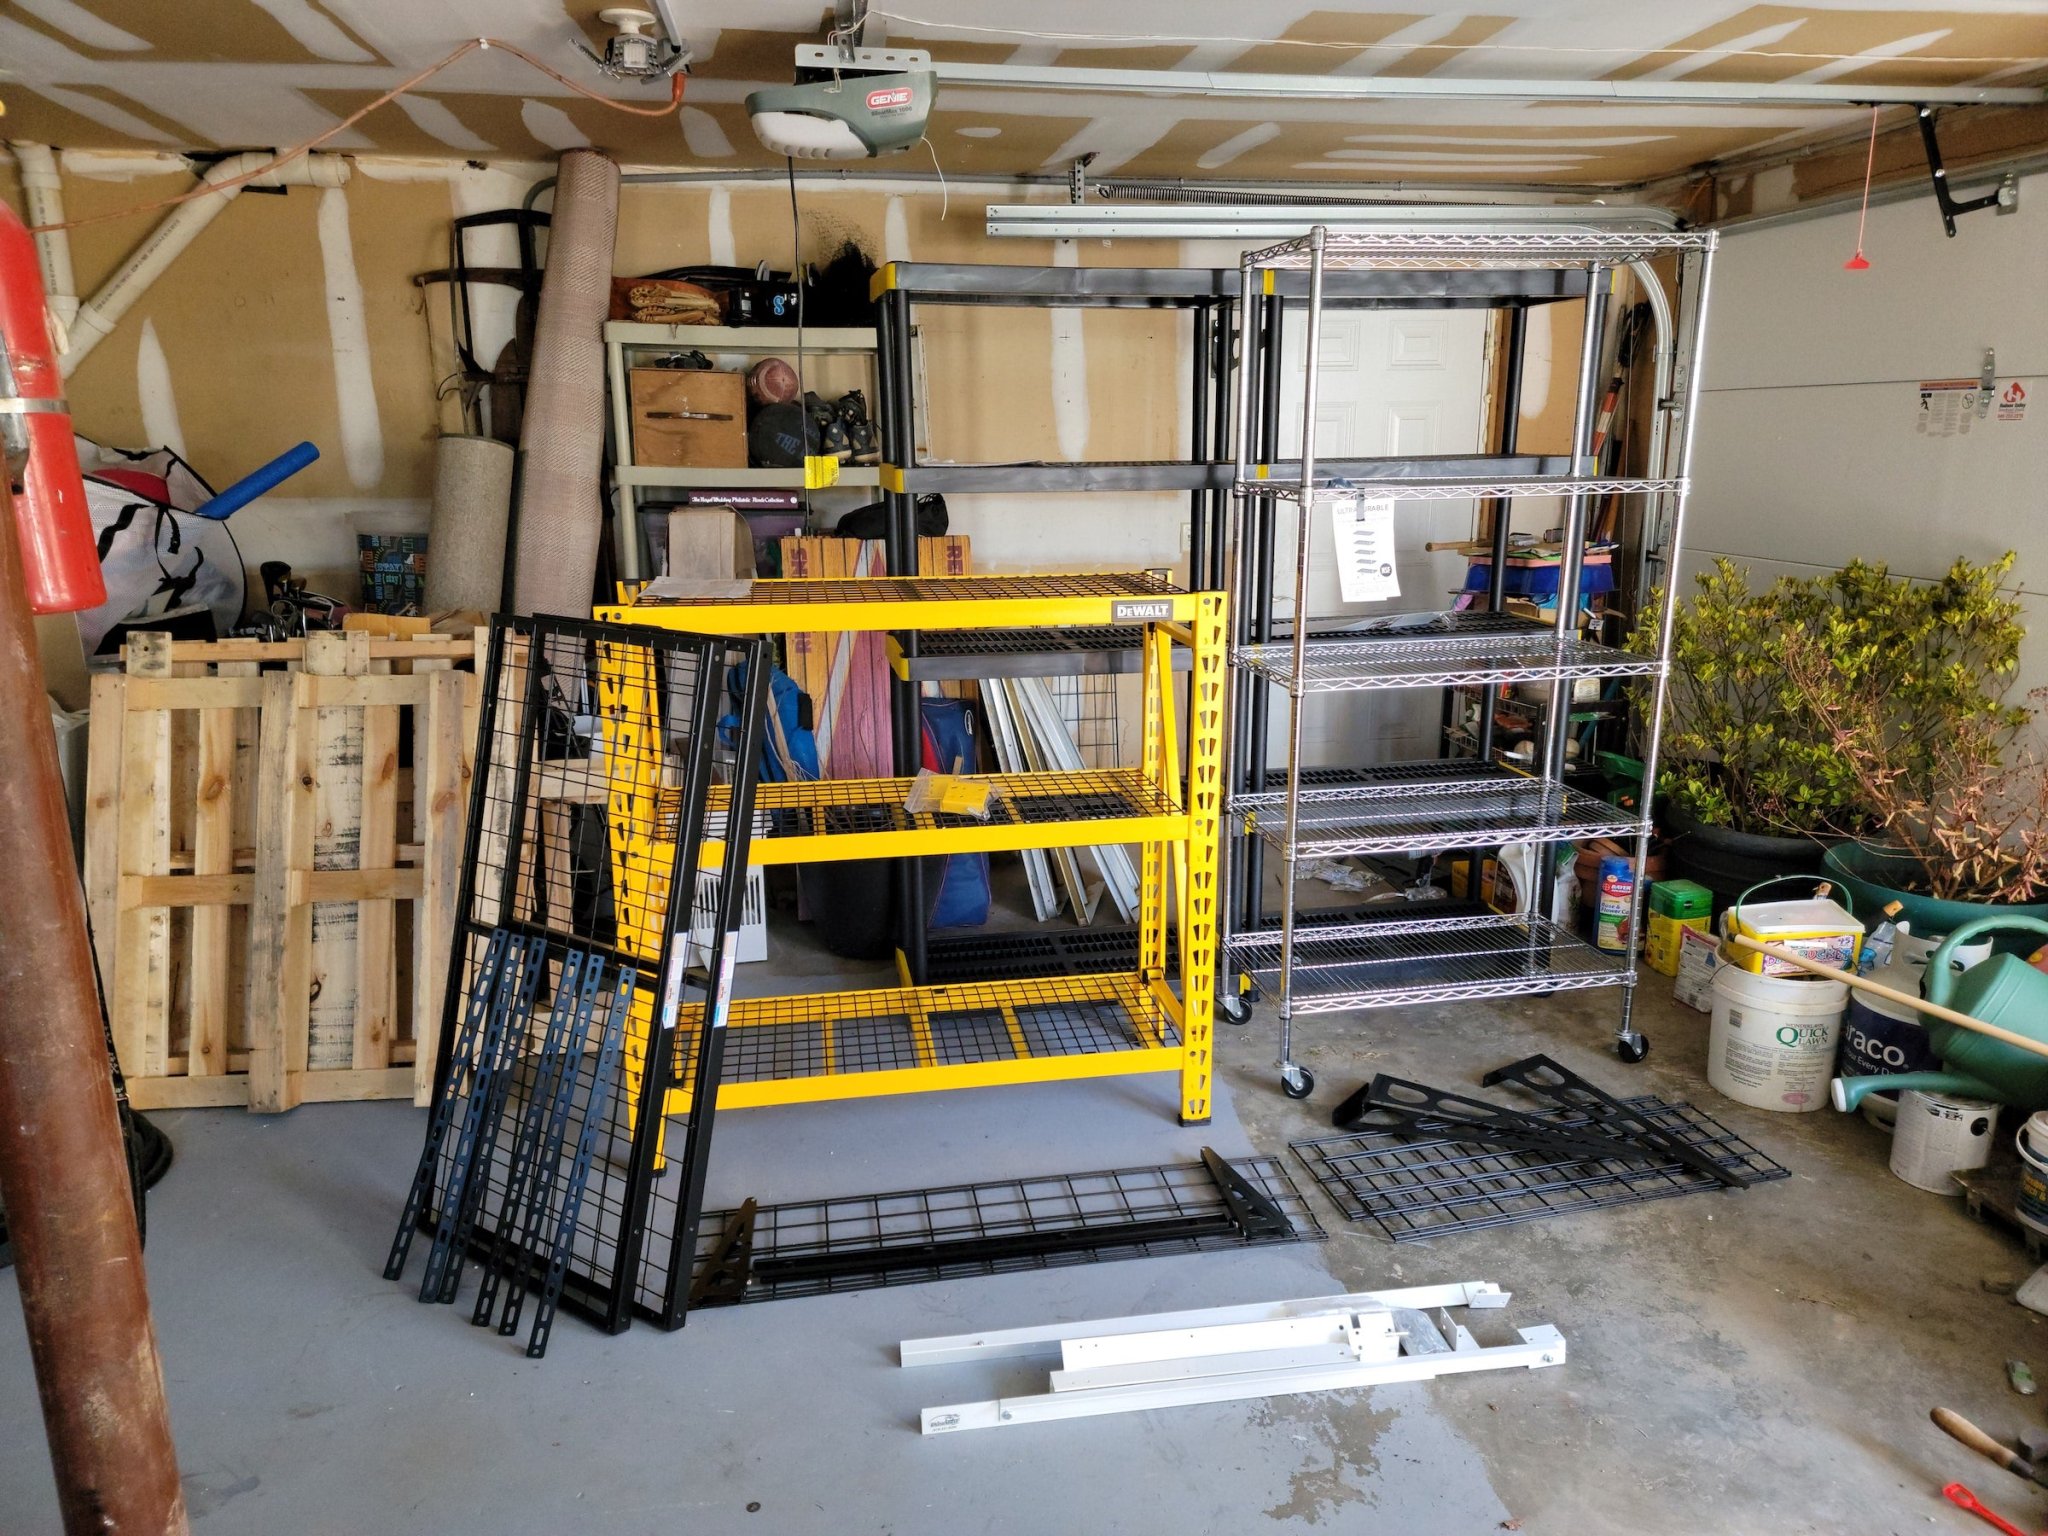 The Best Garage Shelving Tested in 2023